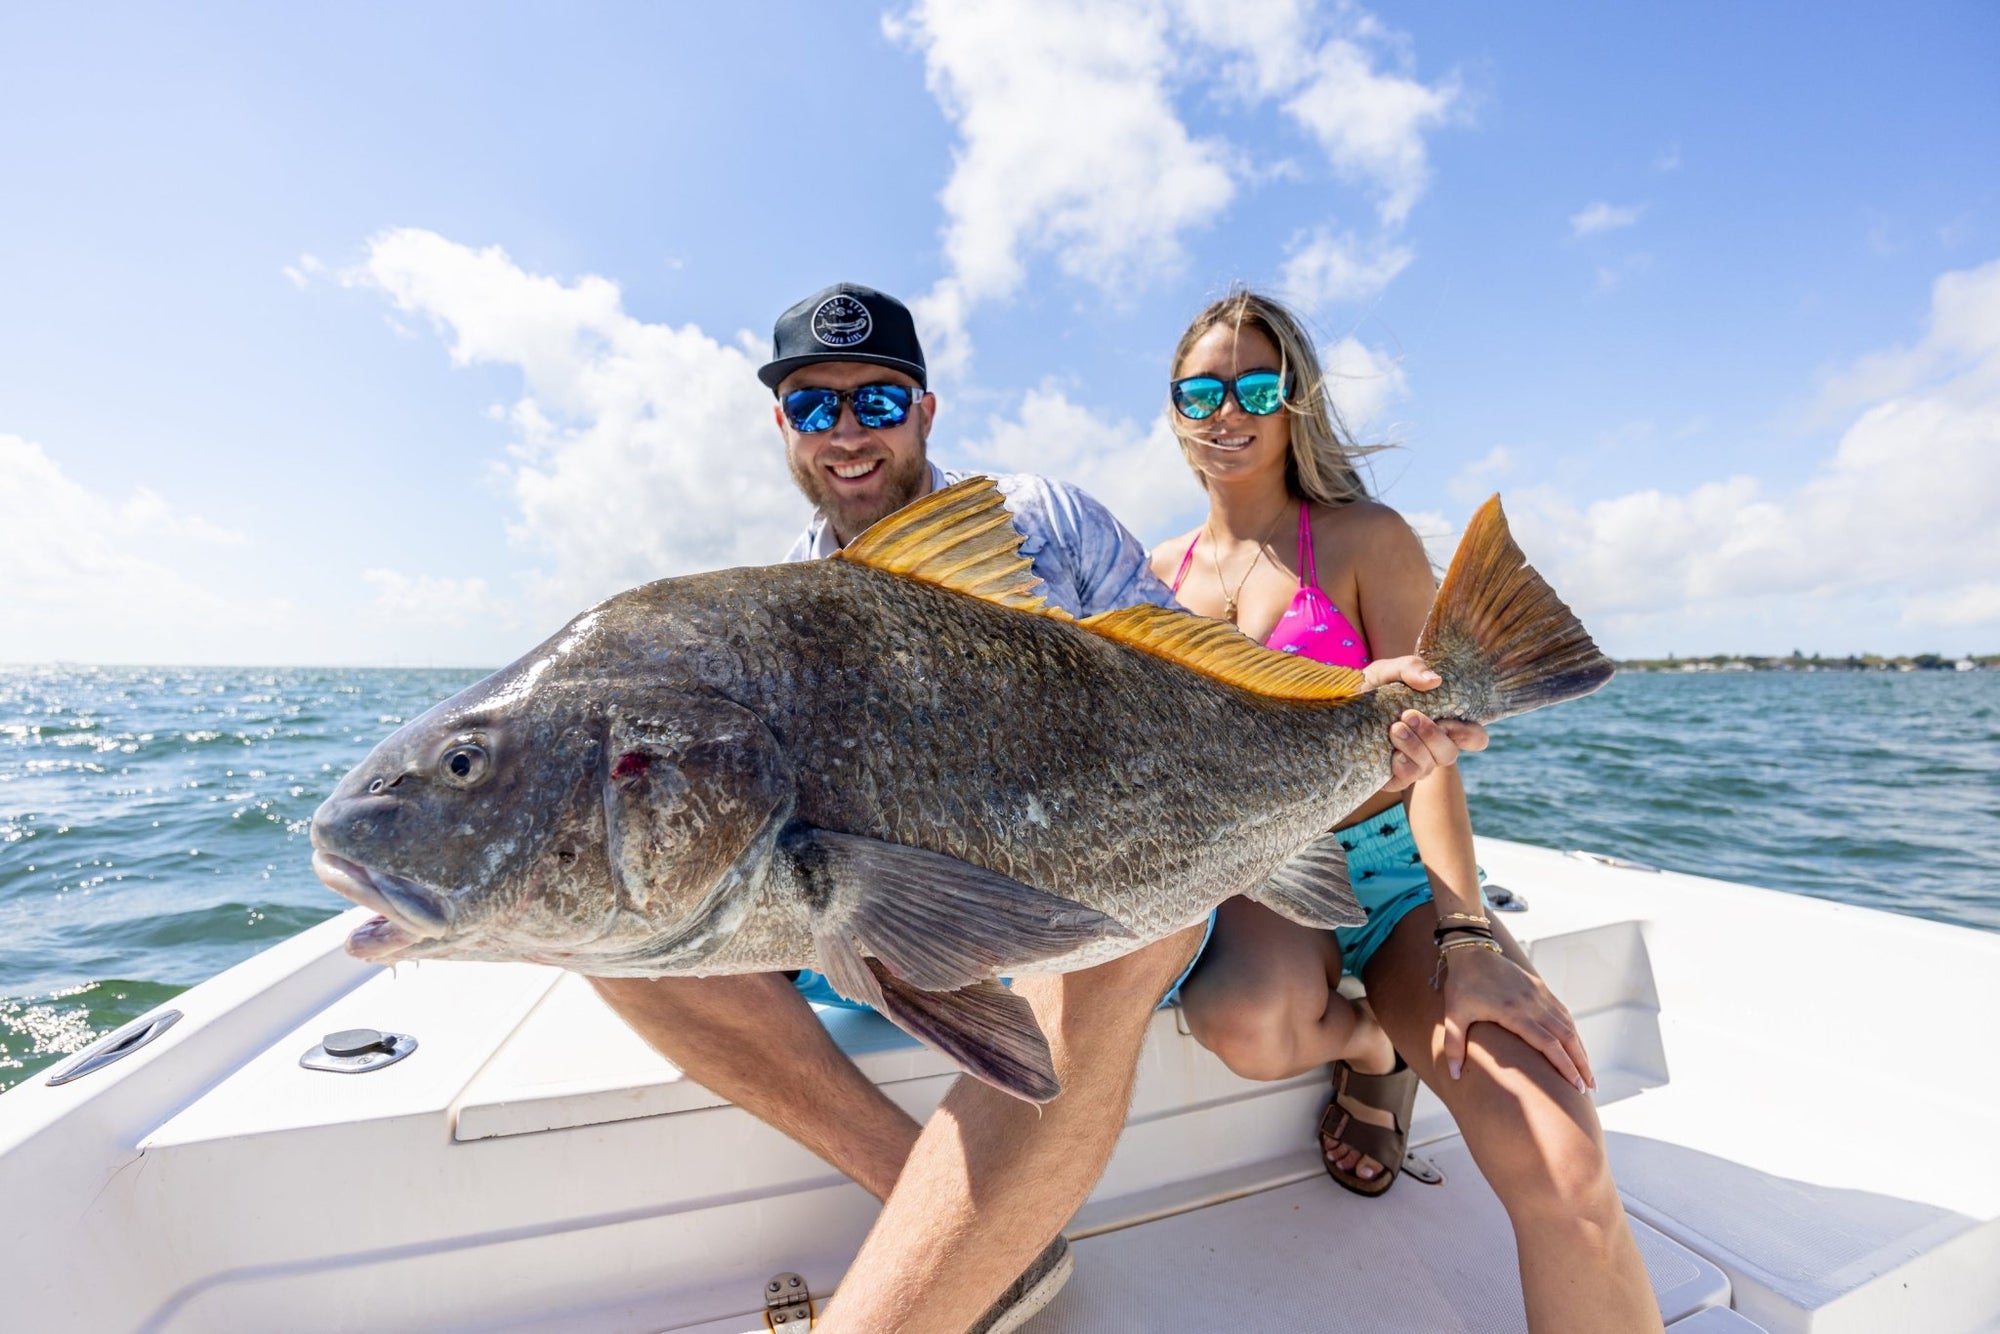 "Why Redfin Polarized Sunglasses are a Game Changer for Offshore Fishing (And How to Avoid Looking Like a Tool)" - RedFin Polarized